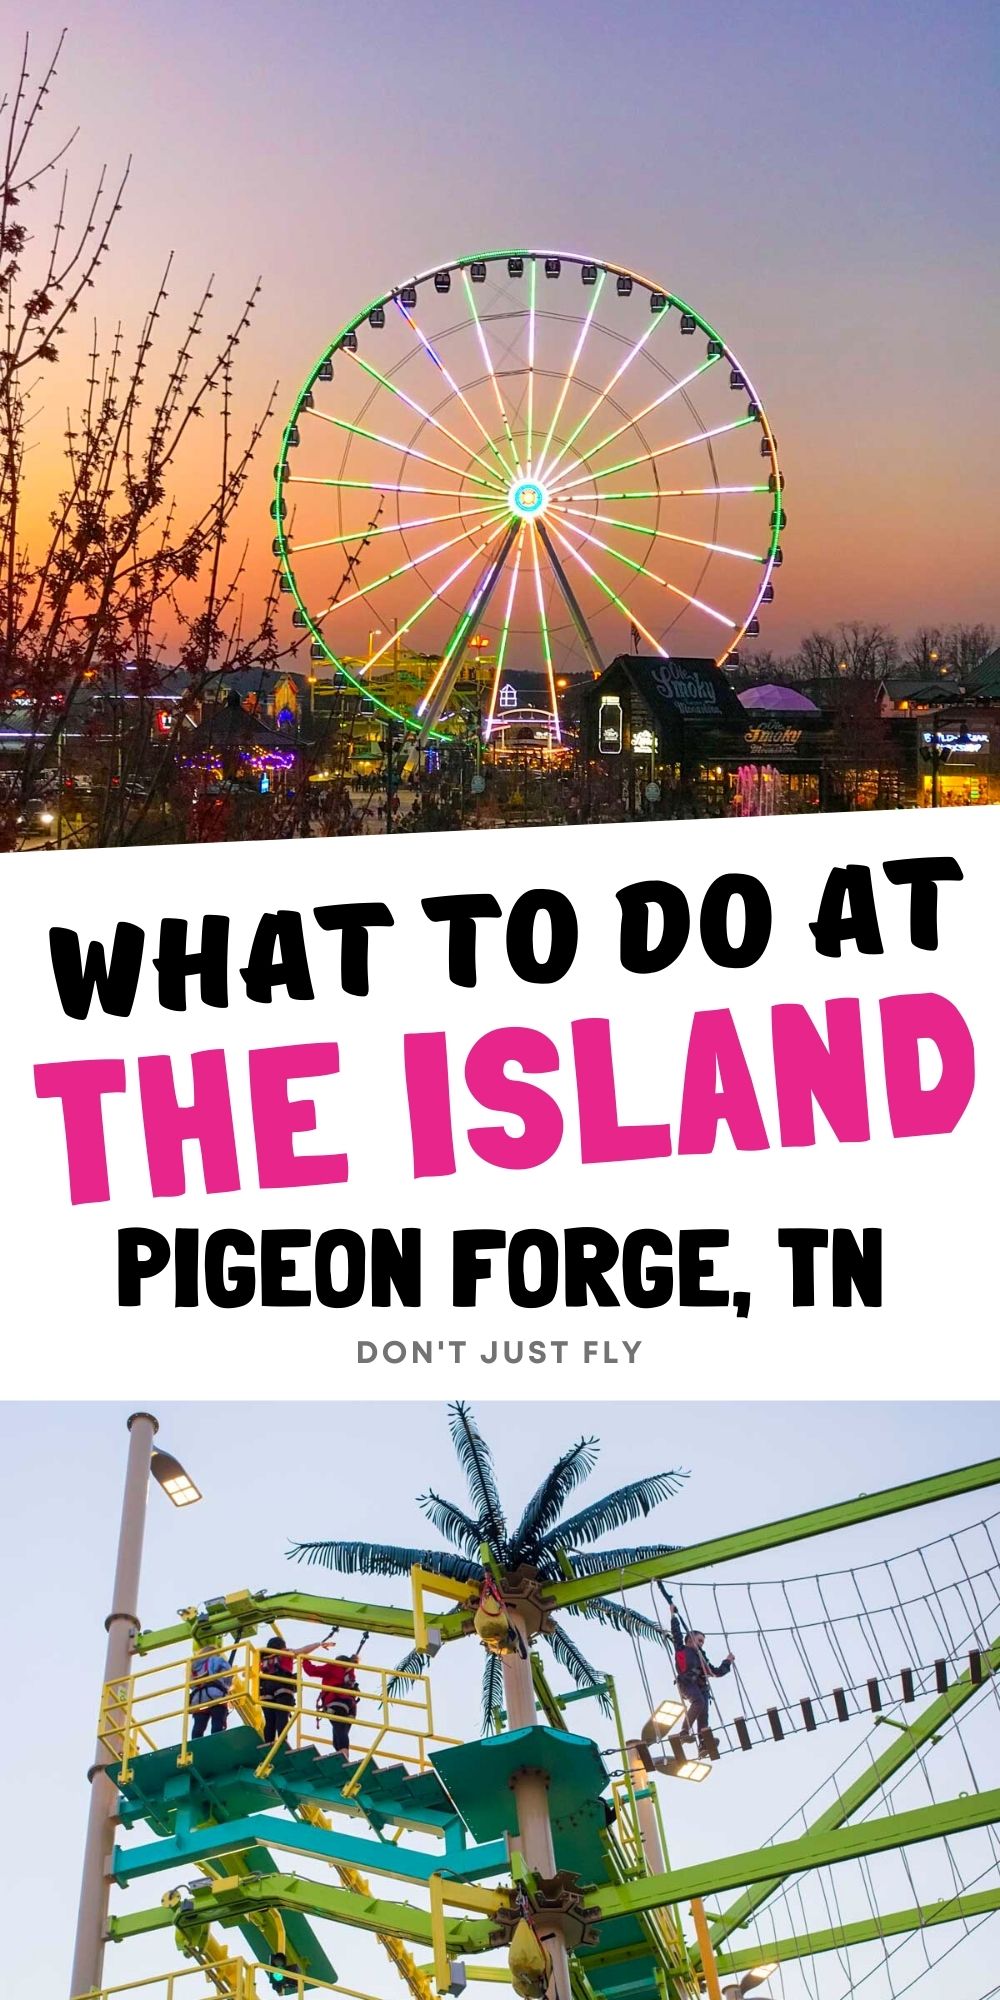 A photo collage shows the ferris wheel and rope course at The Island.